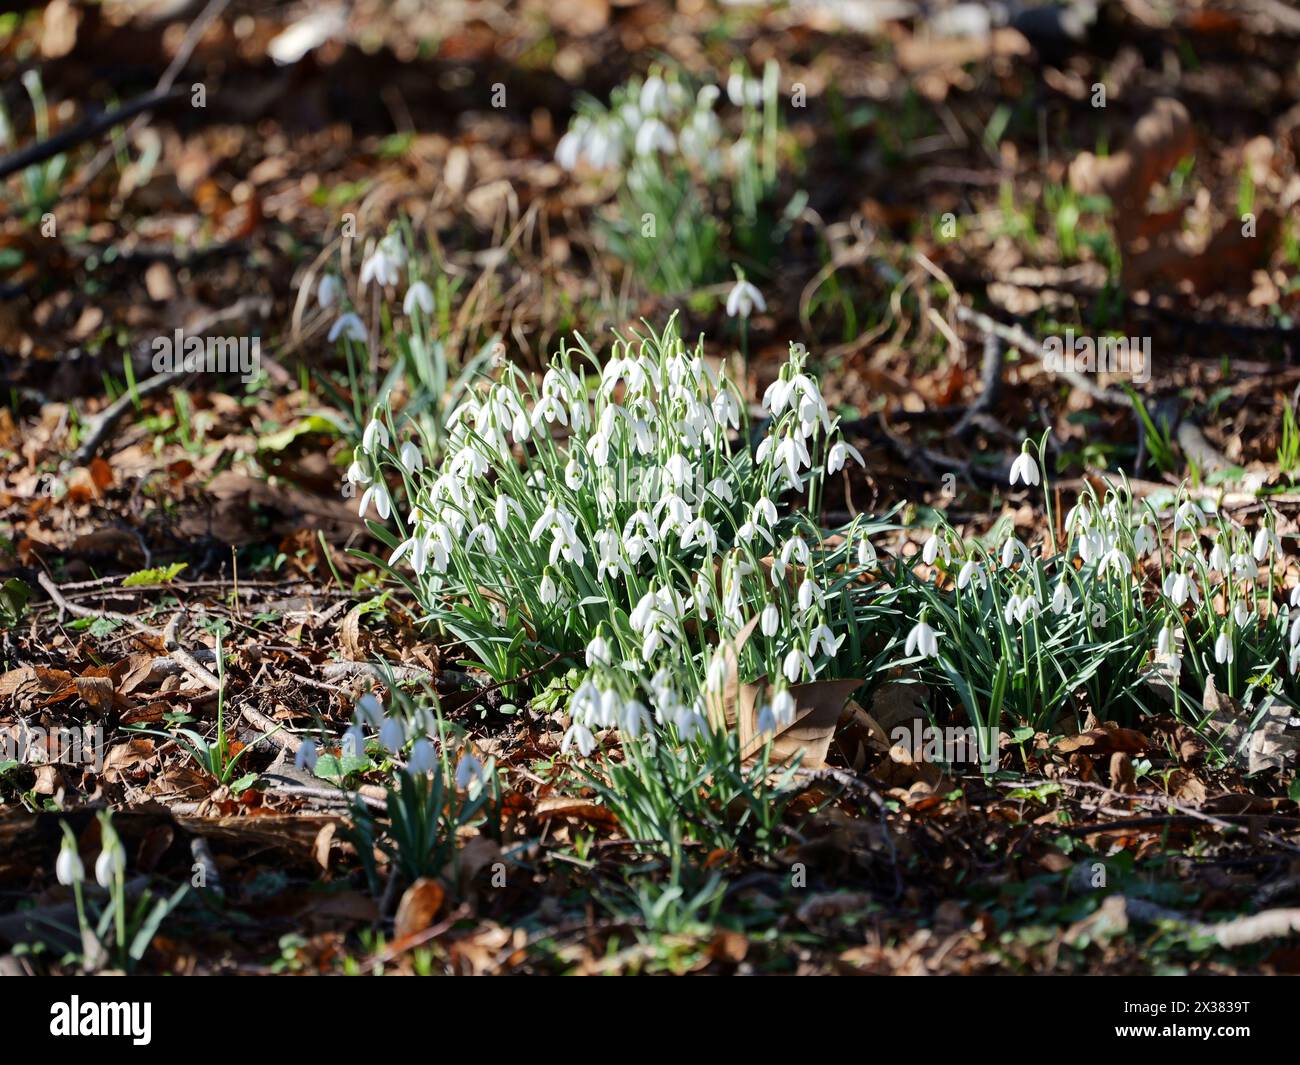 Snowdrops in Putbus Castle Park herald spring's arrival, a picturesque scene inviting nature lovers and photographers alike. Stock Photo